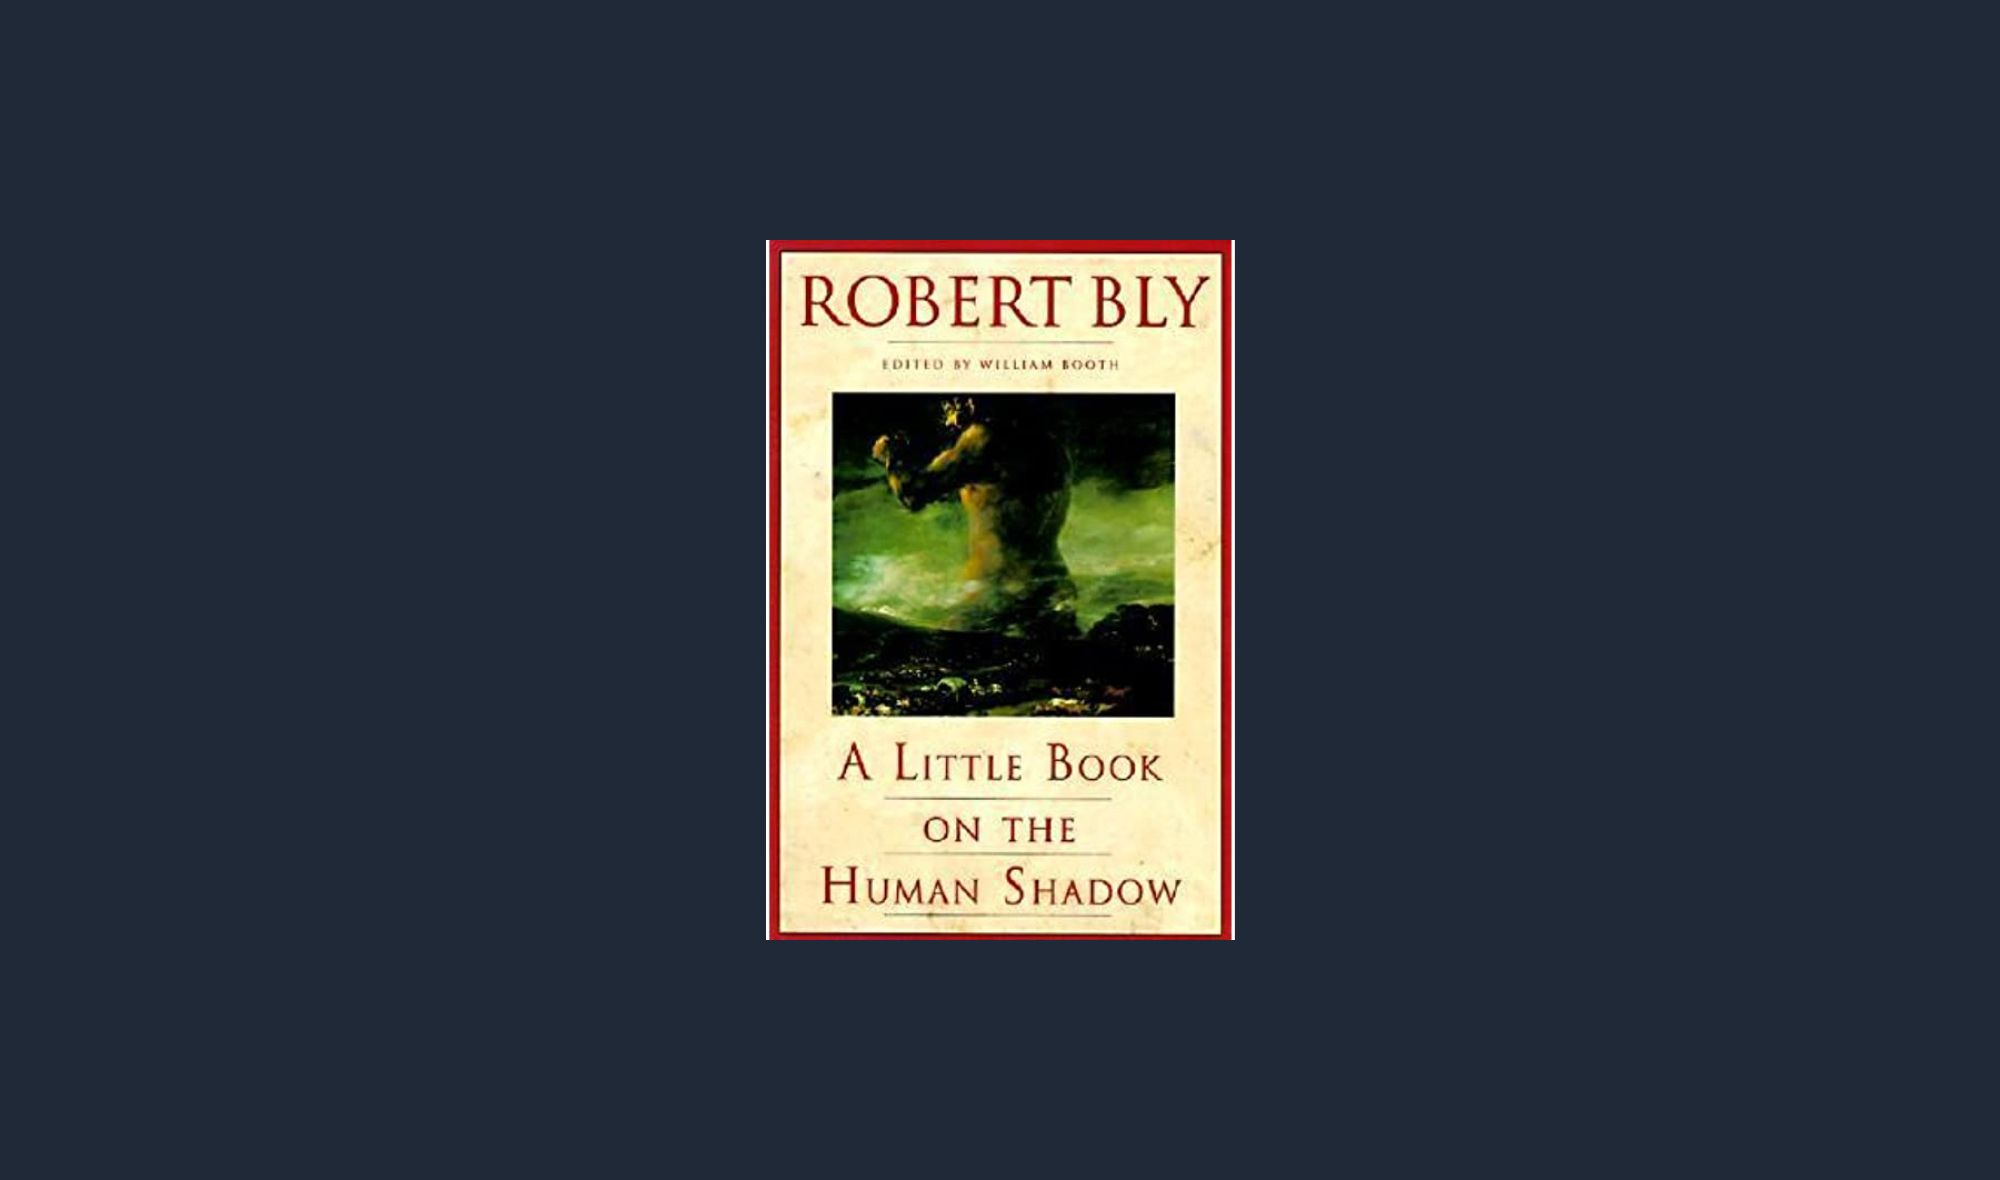 Shadow work books - "A Little Book on the Human Shadow" by Robert Bly